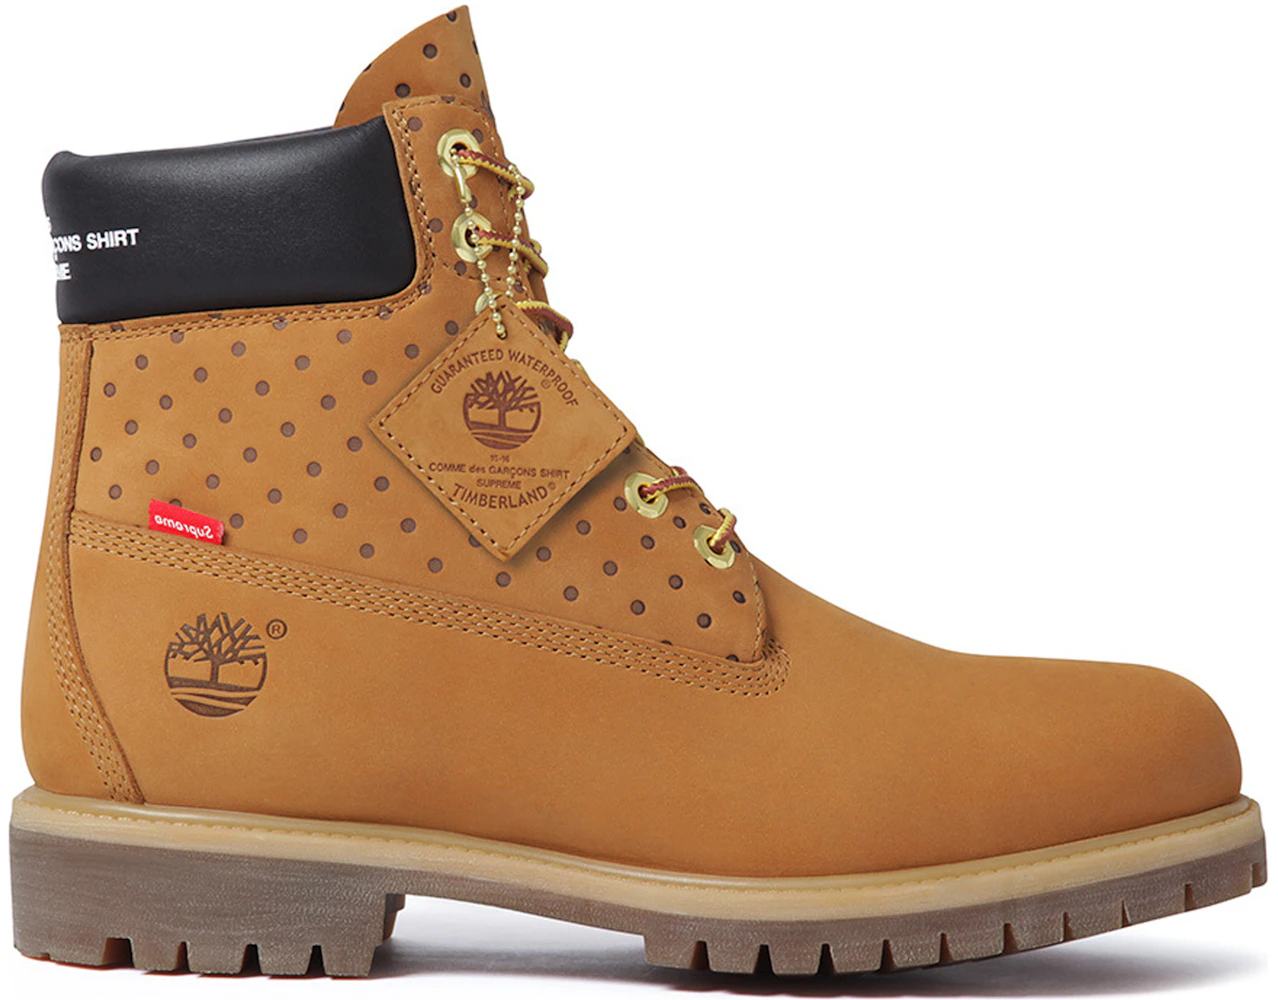 Supreme x Timberland 2016 Fall Winter Field Boot and Apparel Collection